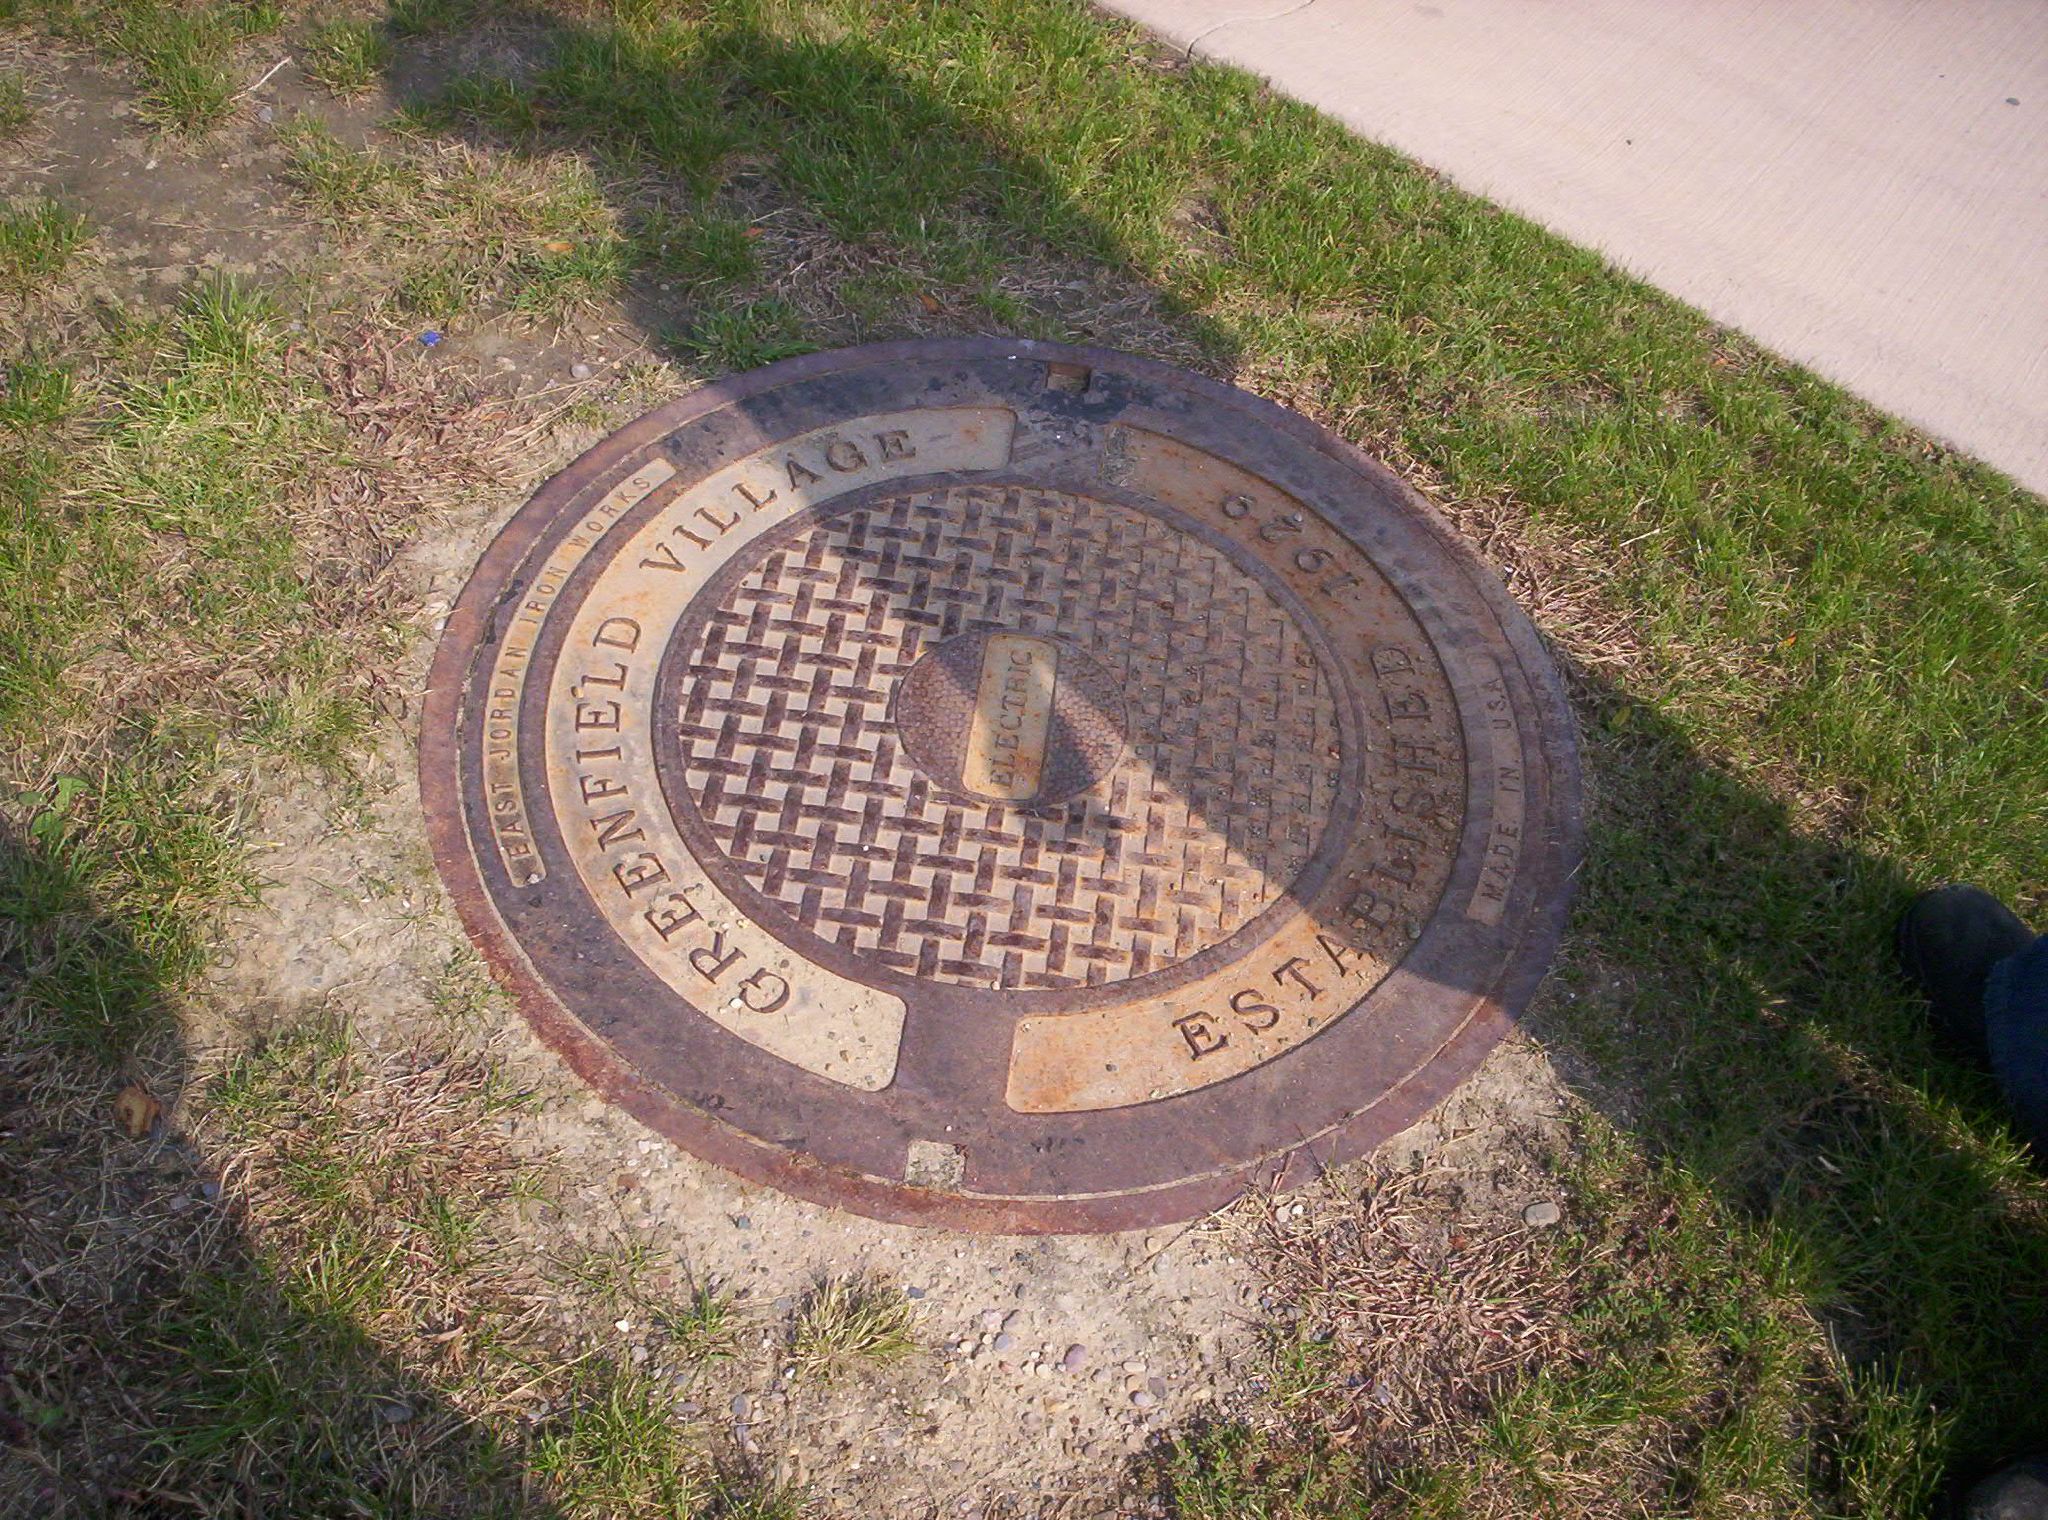 a manhole cover with a design in the center